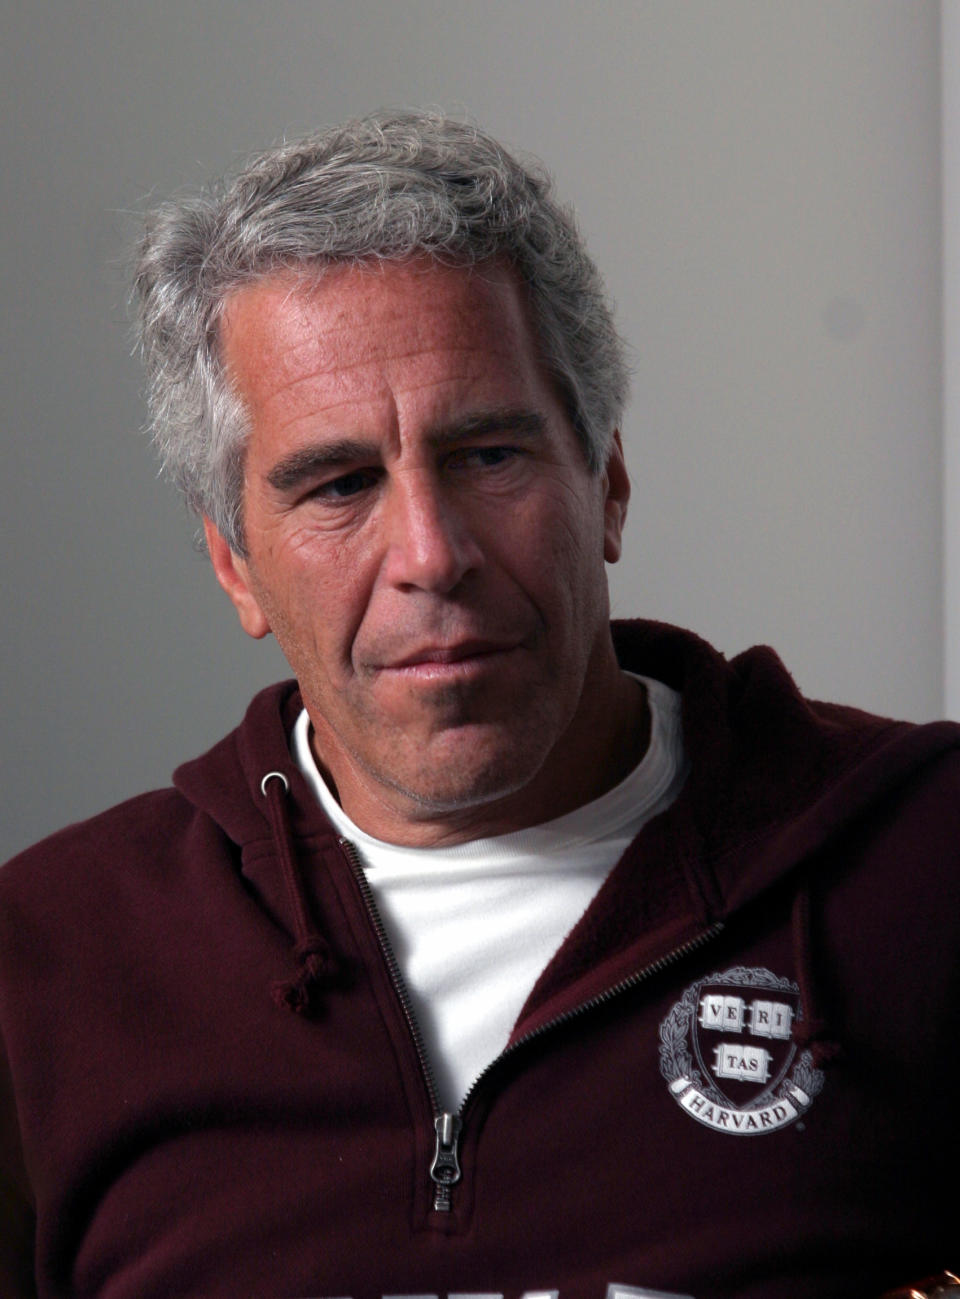 Billionaire Jeffrey Epstein in Cambridge, MA on 9/8/04. Epstein is connected with several prominent people including politicians, actors and academics. Epstein was convicted of having sex with an underaged woman. (Photo by Rick Friedman/Rick Friedman Photography/Corbis via Getty Images)